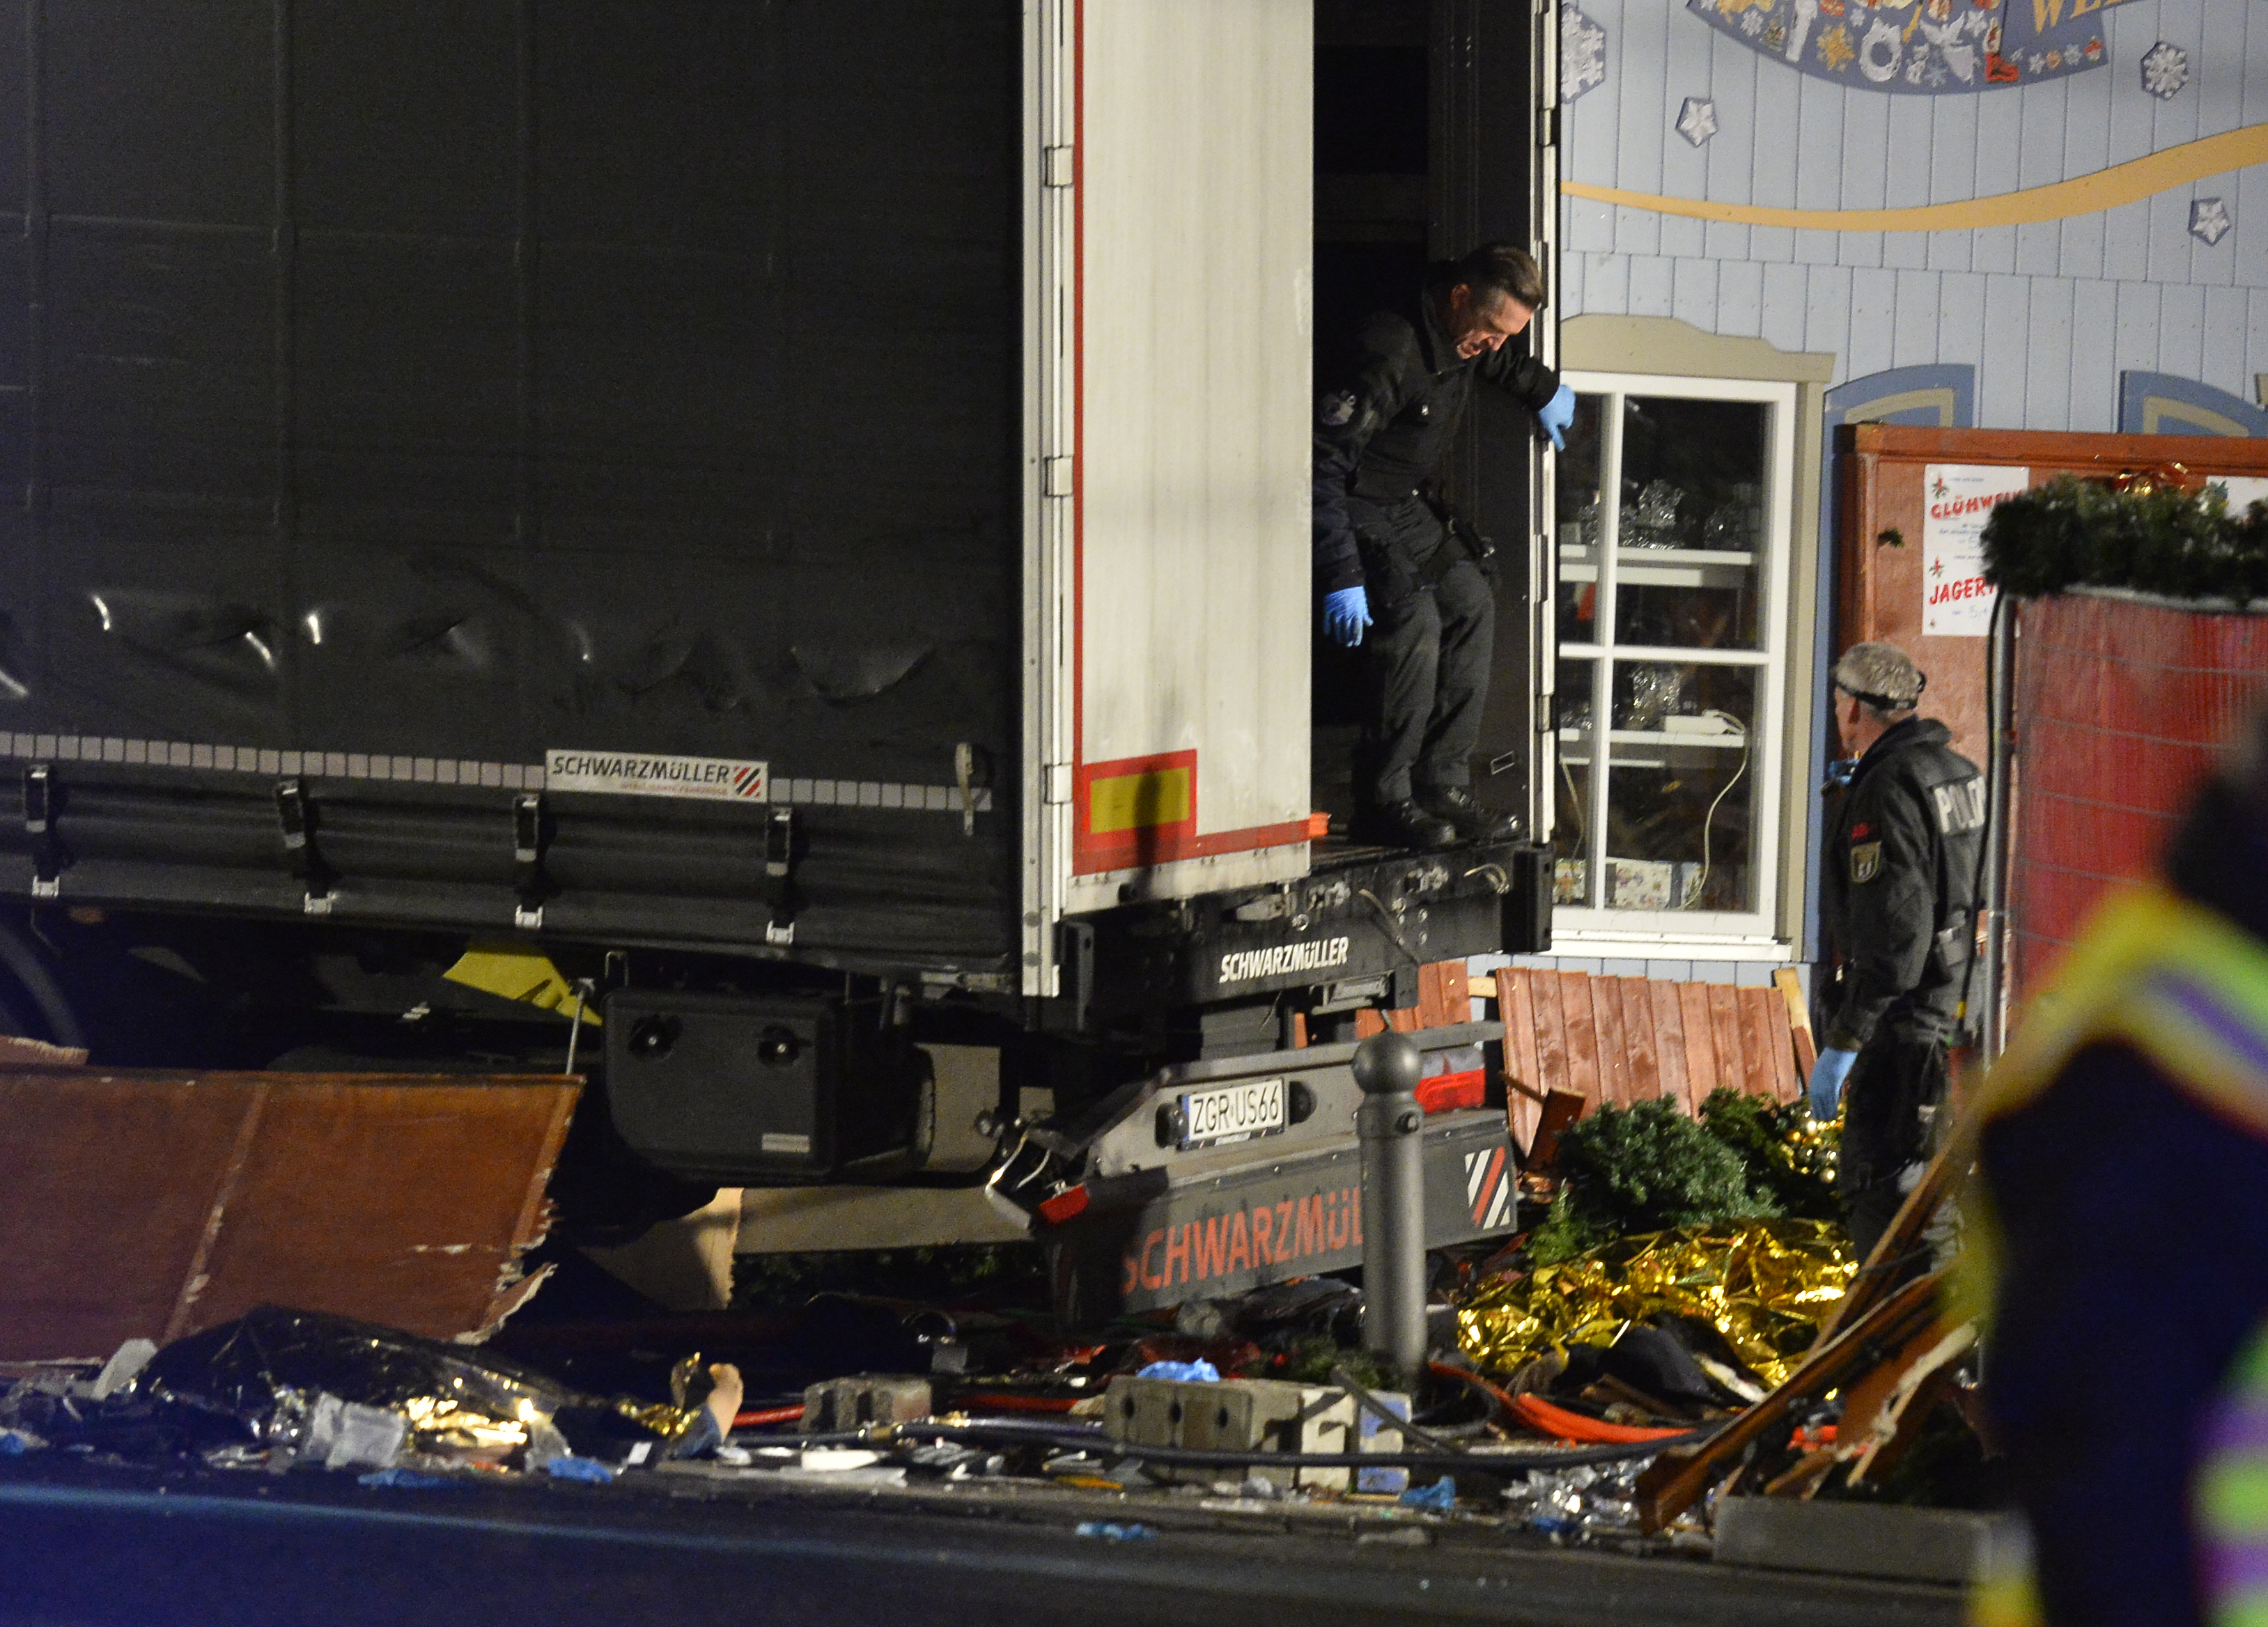 Policemen get of the truck that speeded into a christmas market in Berlin, on December 19, 2016 killing at least one person and injuring at least 50 people. Ambulances and heavily armed officers rushed to the area after the driver drove up the pavement of the market in a square popular with tourists, in scenes reminiscent of the deadly truck attack in the French city of Nice in July. / AFP PHOTO / John MACDOUGALL